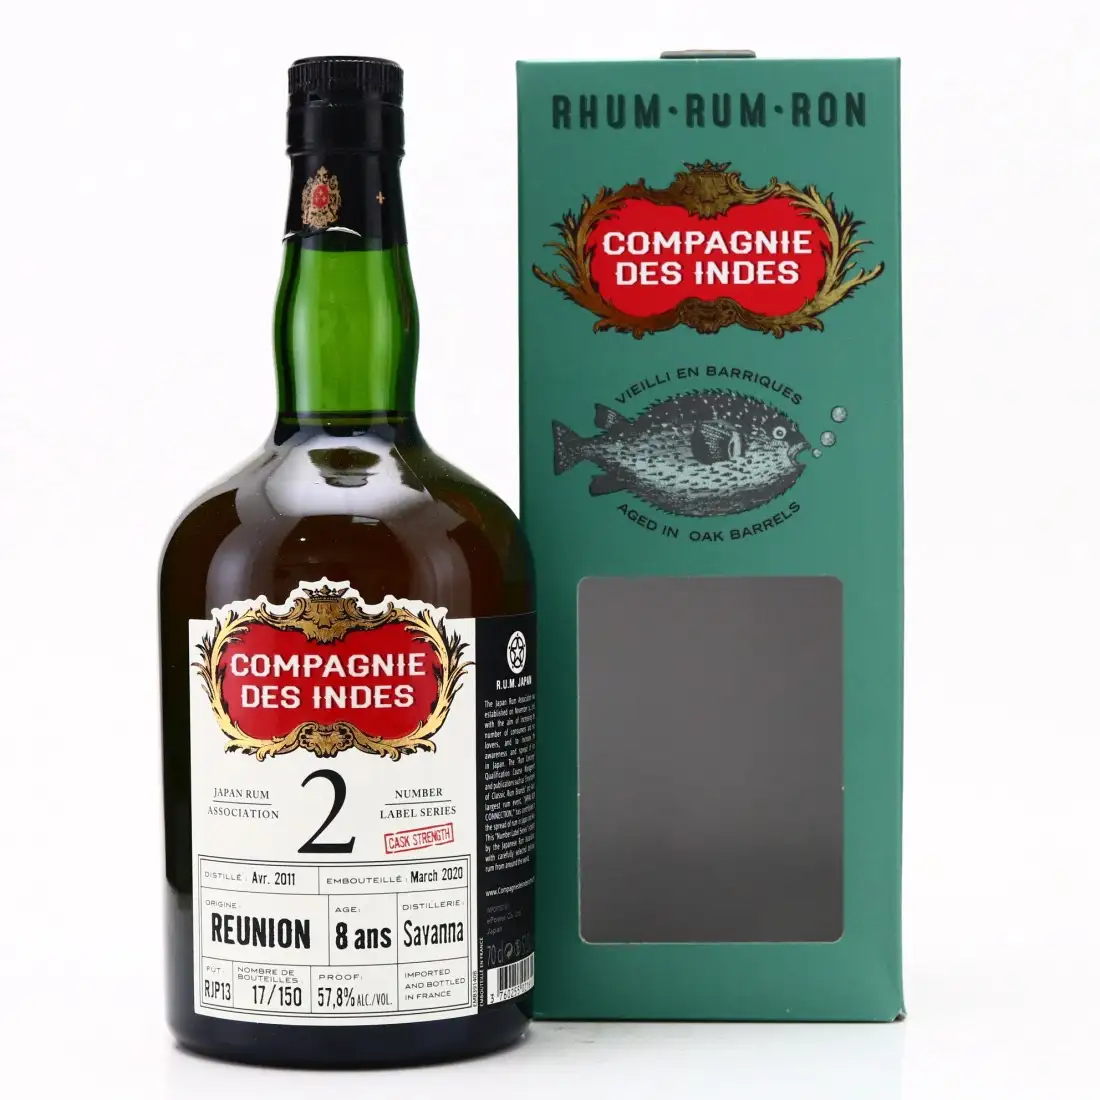 Image of the front of the bottle of the rum Japan Rum Association Number 2 Label Series